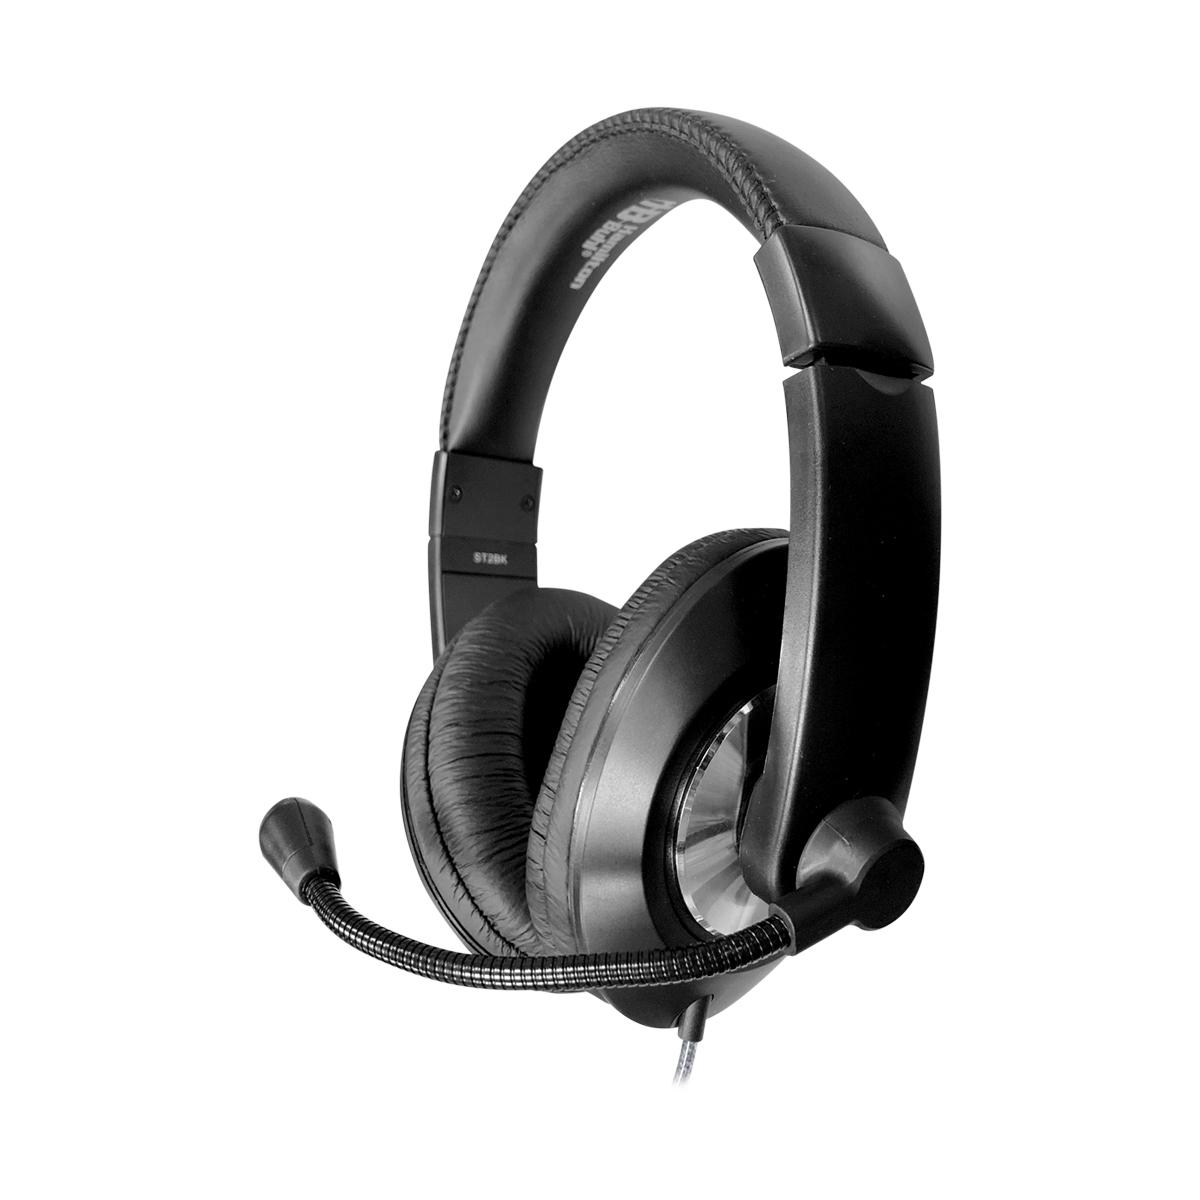  Smart-Trek Deluxe Stereo Headset with 3.5mm Plug 